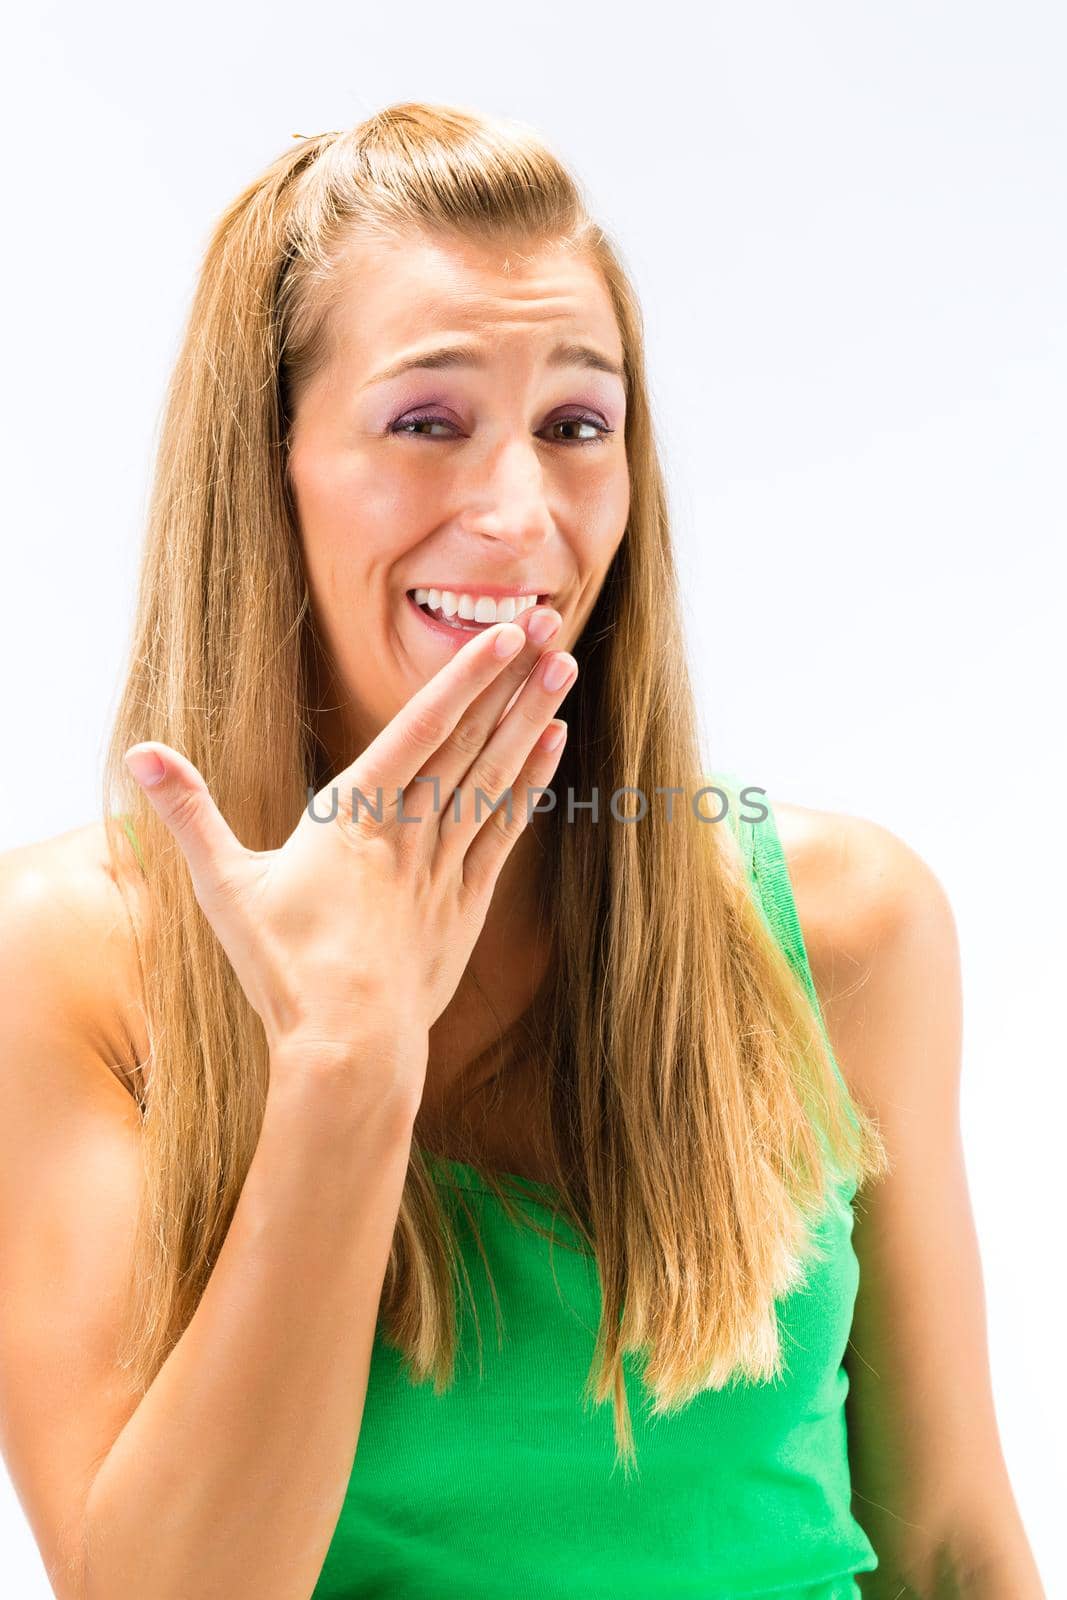 Close-up of blonde young woman laughing with hand over the mouth isolated over white background